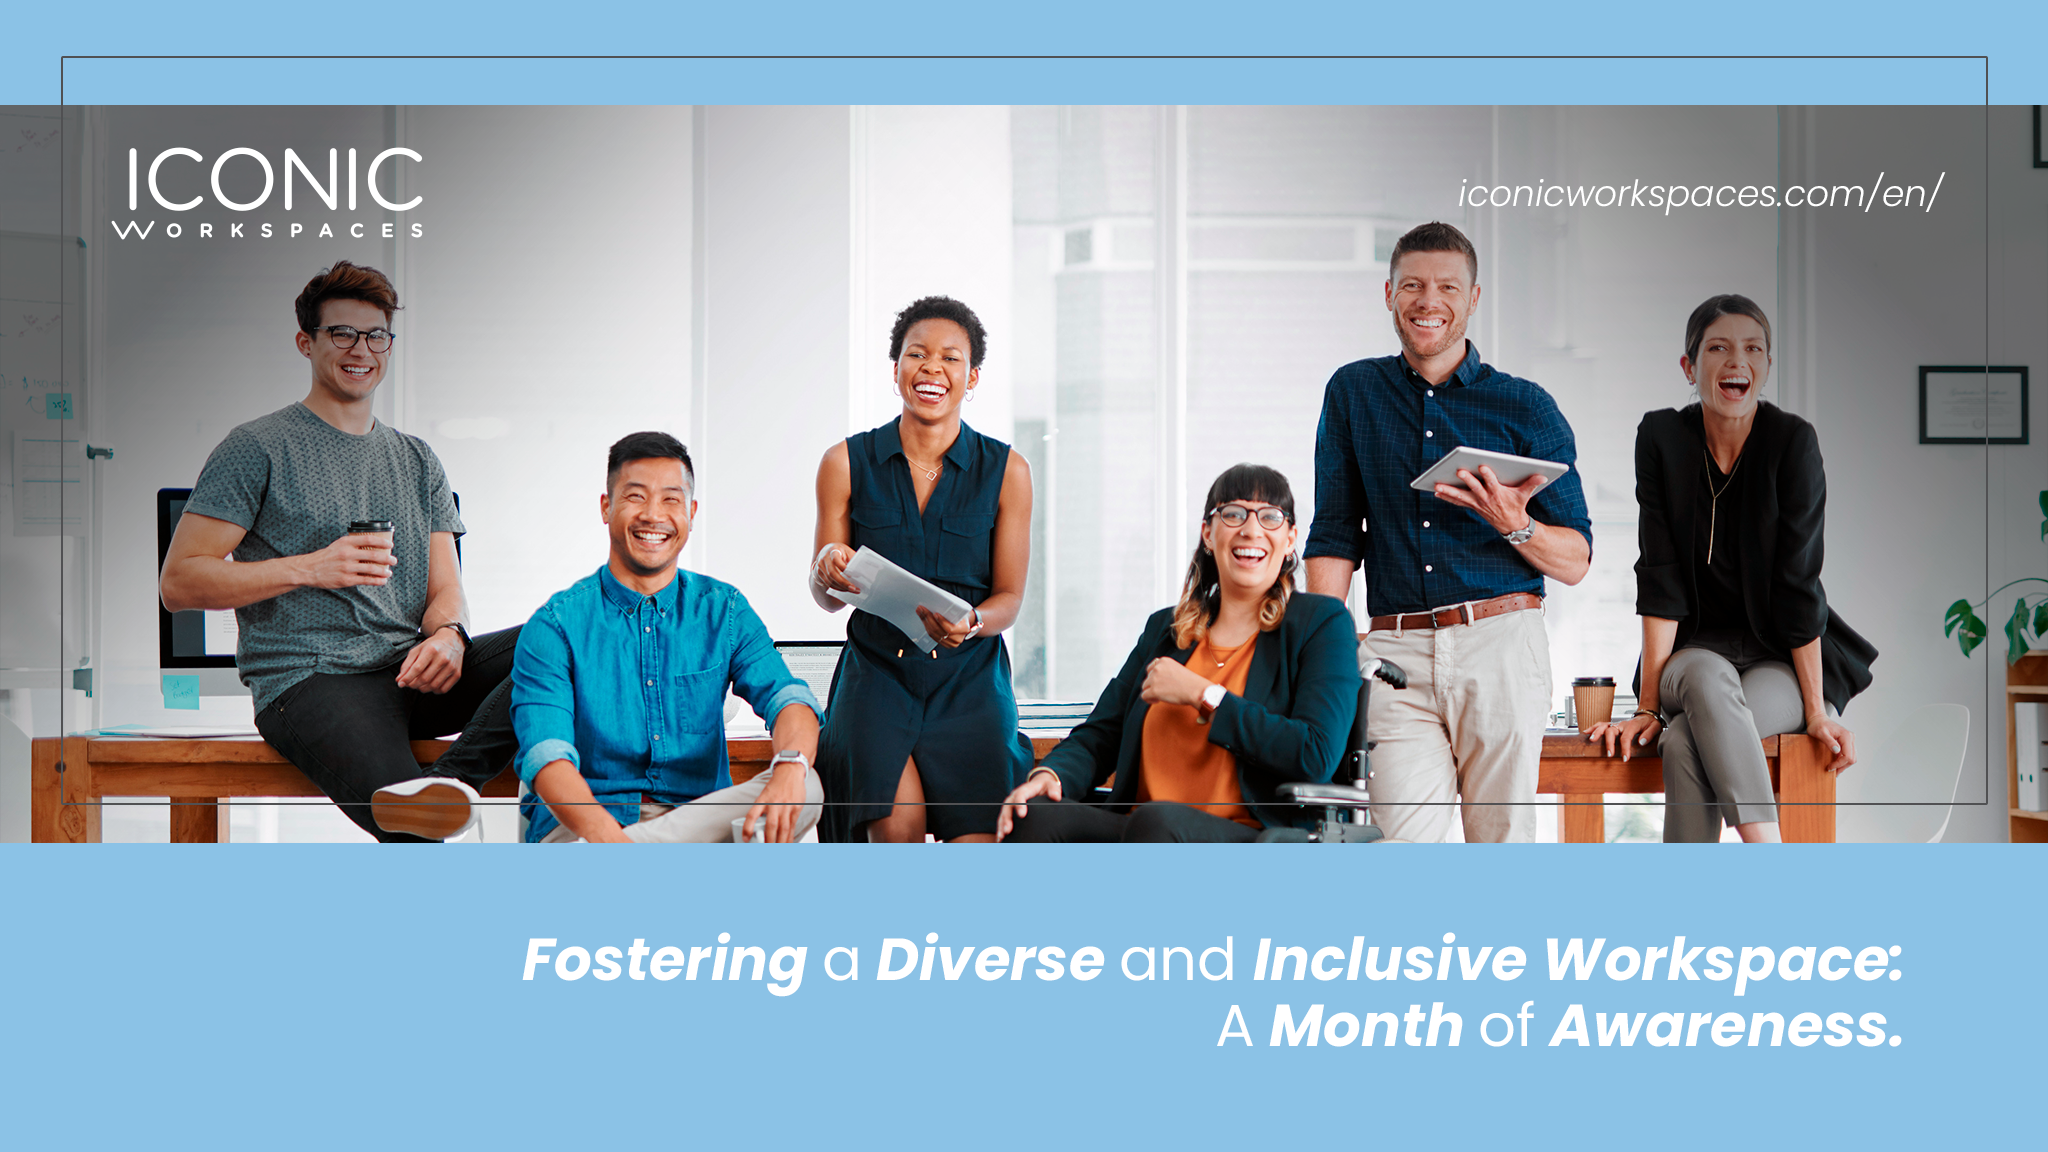 Fostering a Diverse and Inclusive Workspace: A Month of Awareness